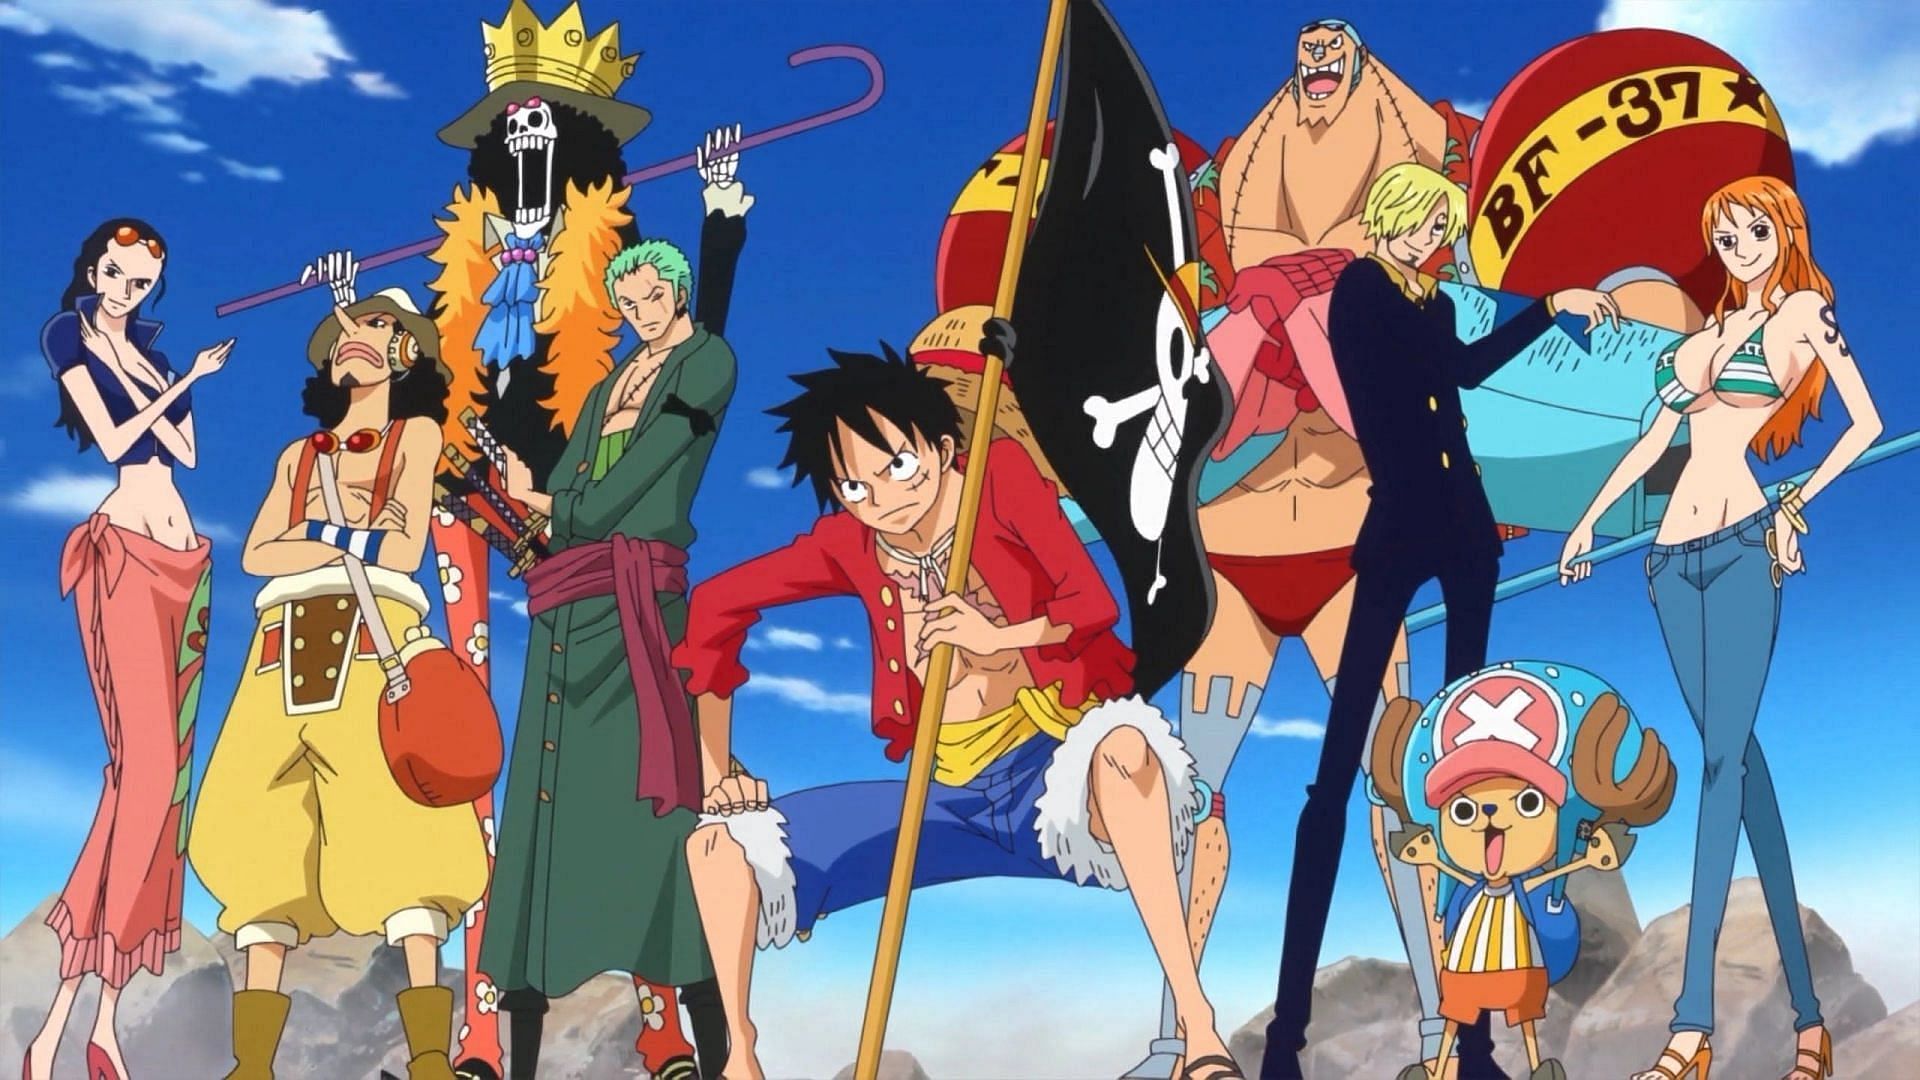 Will One Piece end after the release of episode 1000. Future of One Piece explained (Image via Toei Animation)